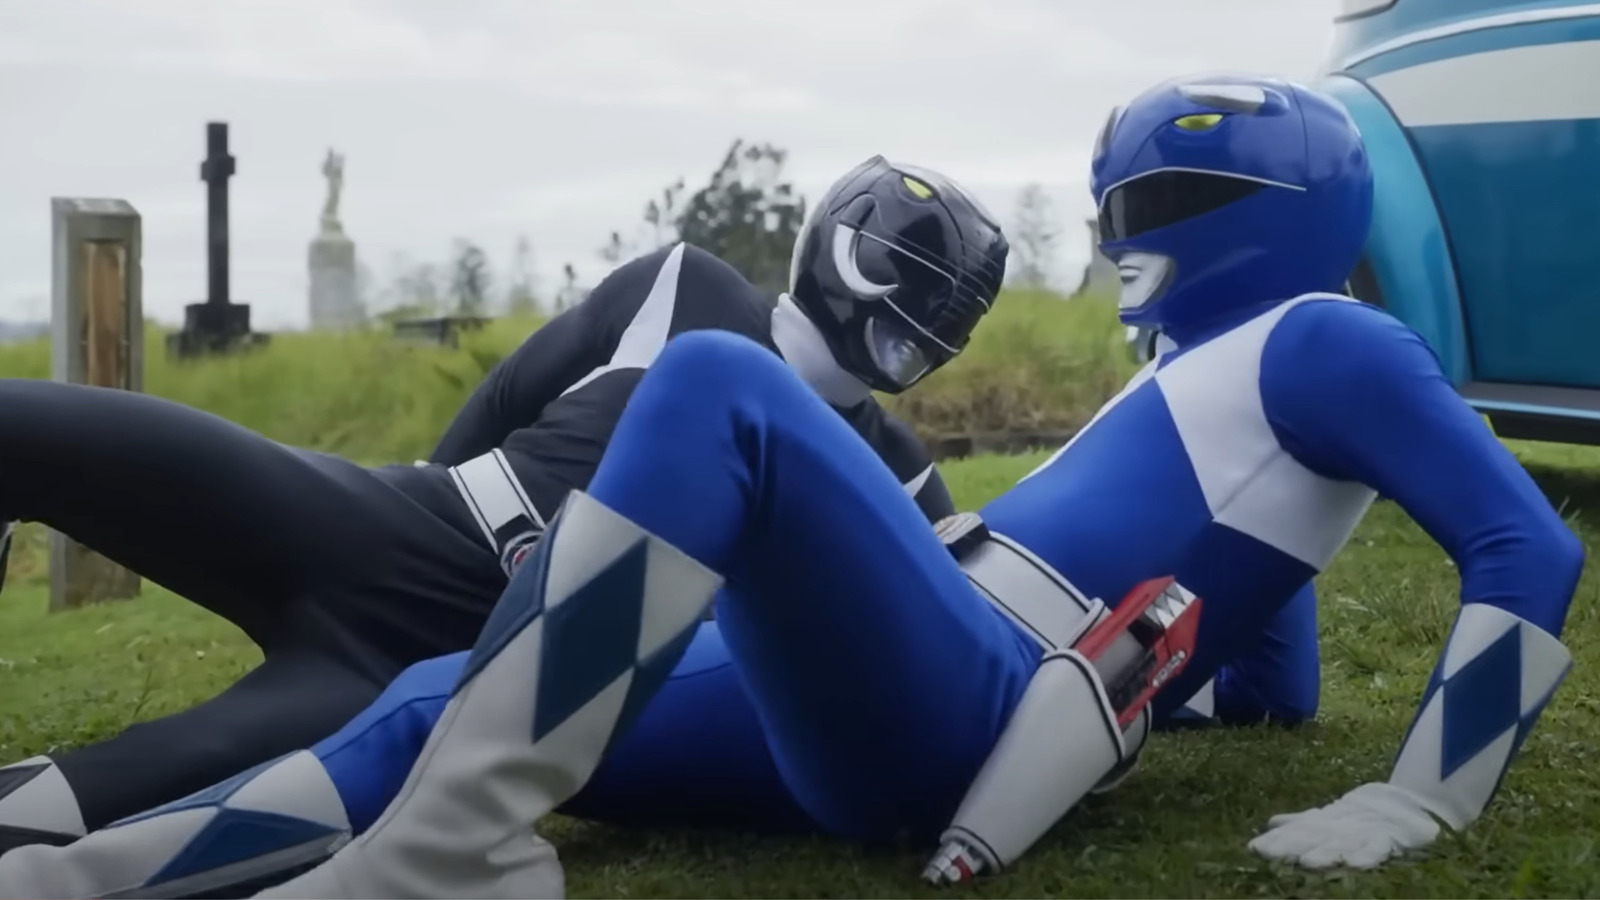 7 Surprising Things You Never Knew About The 'Mighty Morphin' Power Rangers